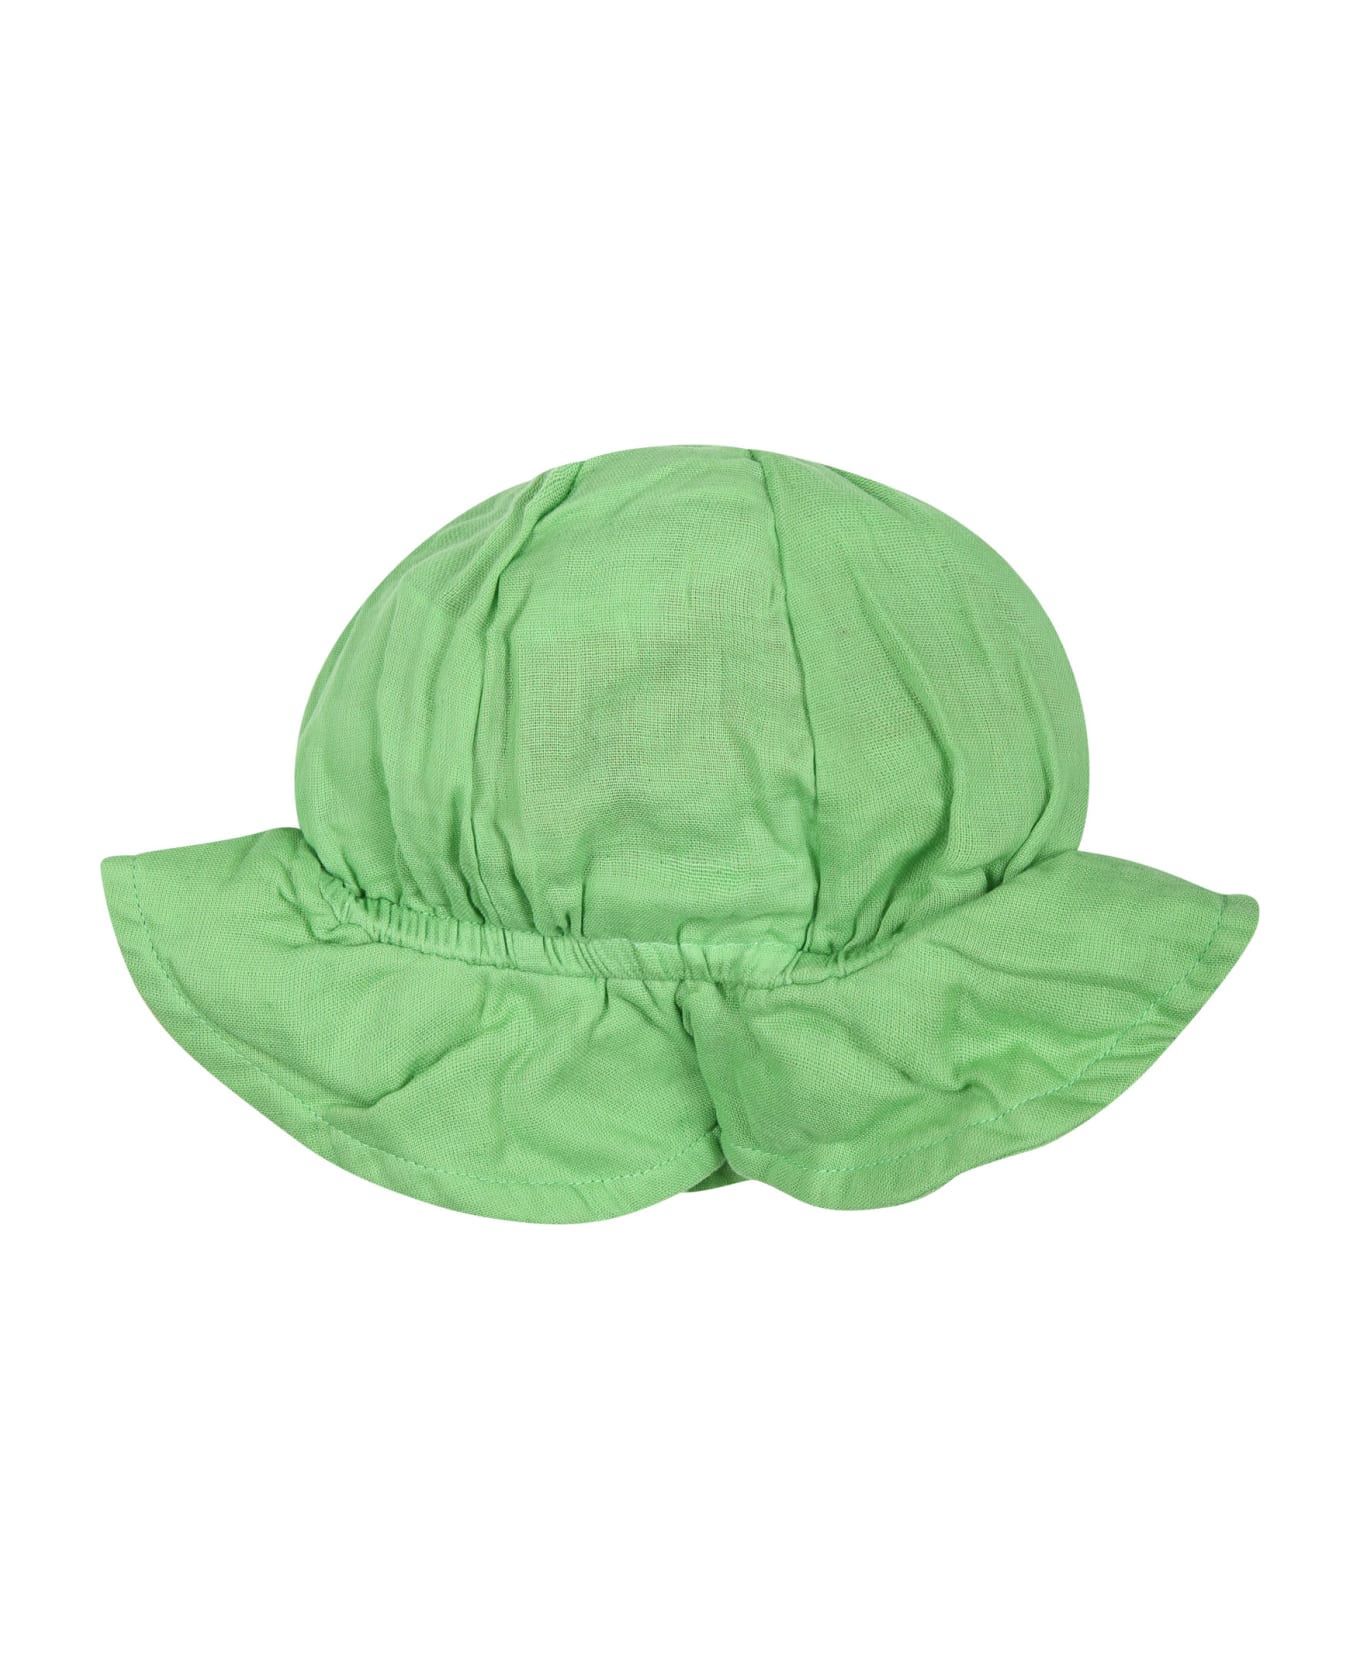 Molo Green Cloche For Bébé Kids With Smile - Green アクセサリー＆ギフト